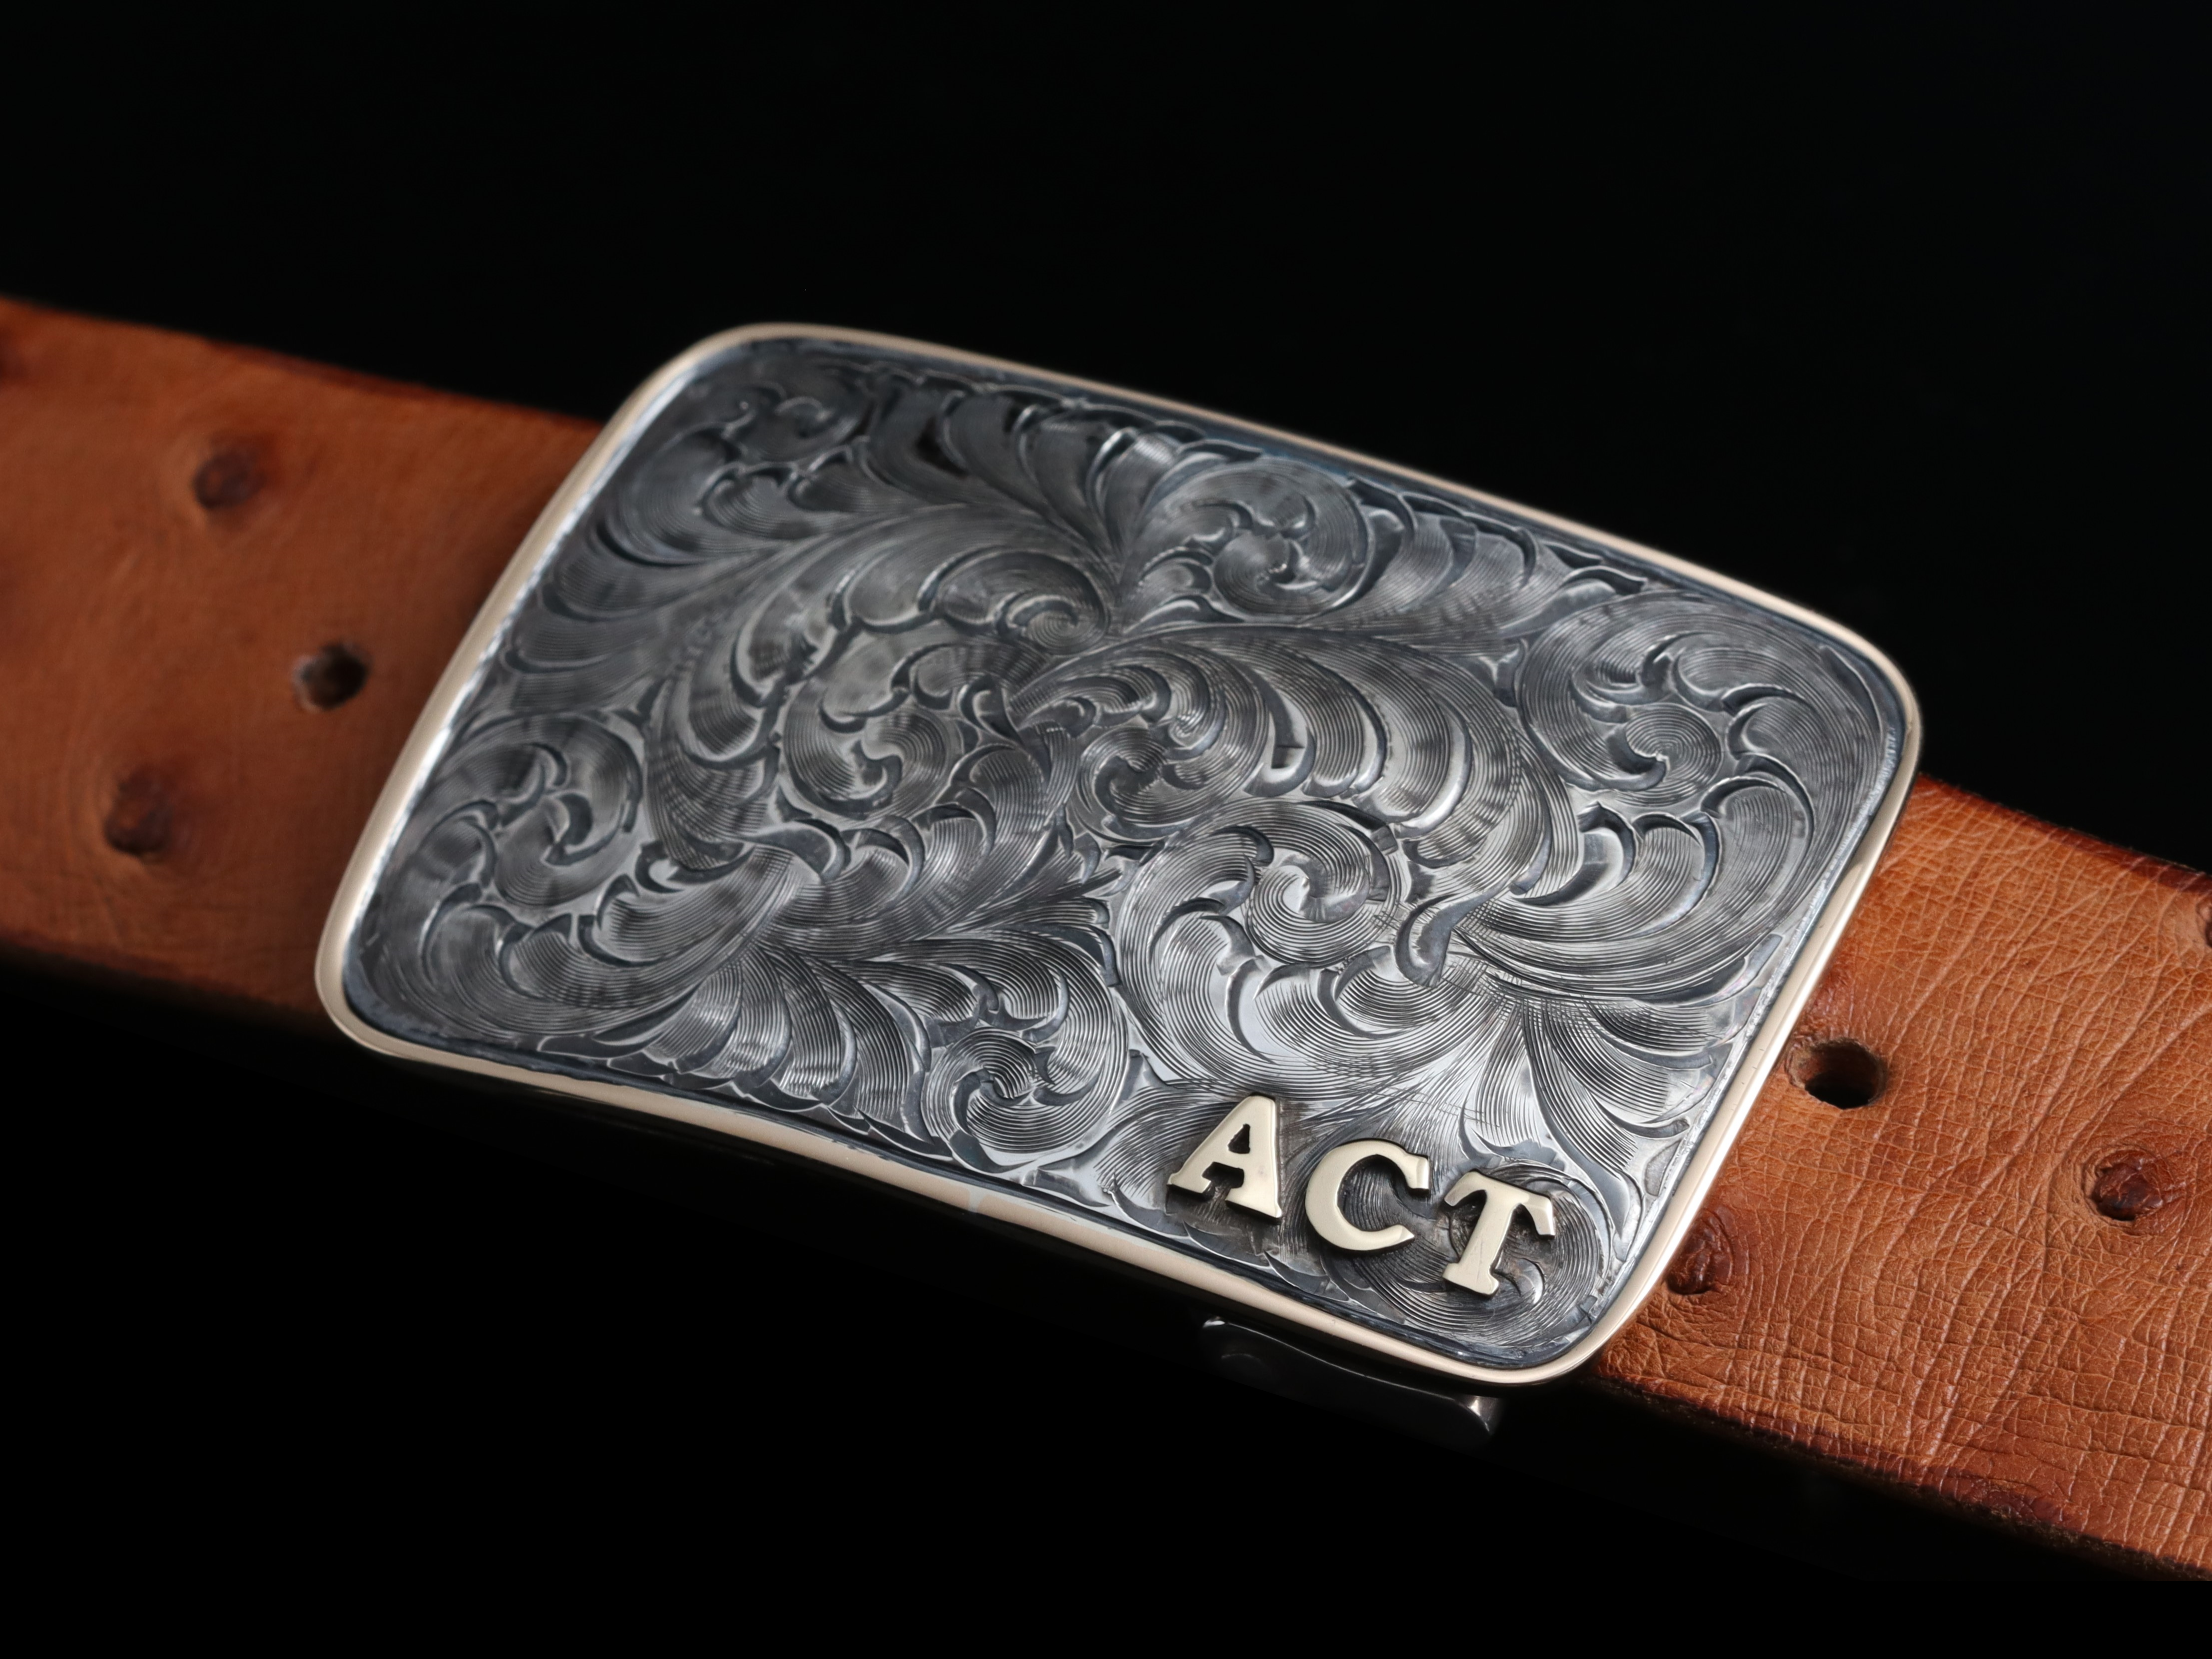 Comstock Heritage New Orleans Engraved Buckle | 14K Gold Monogram Belt Buckle Sterling Silver and 14K initials